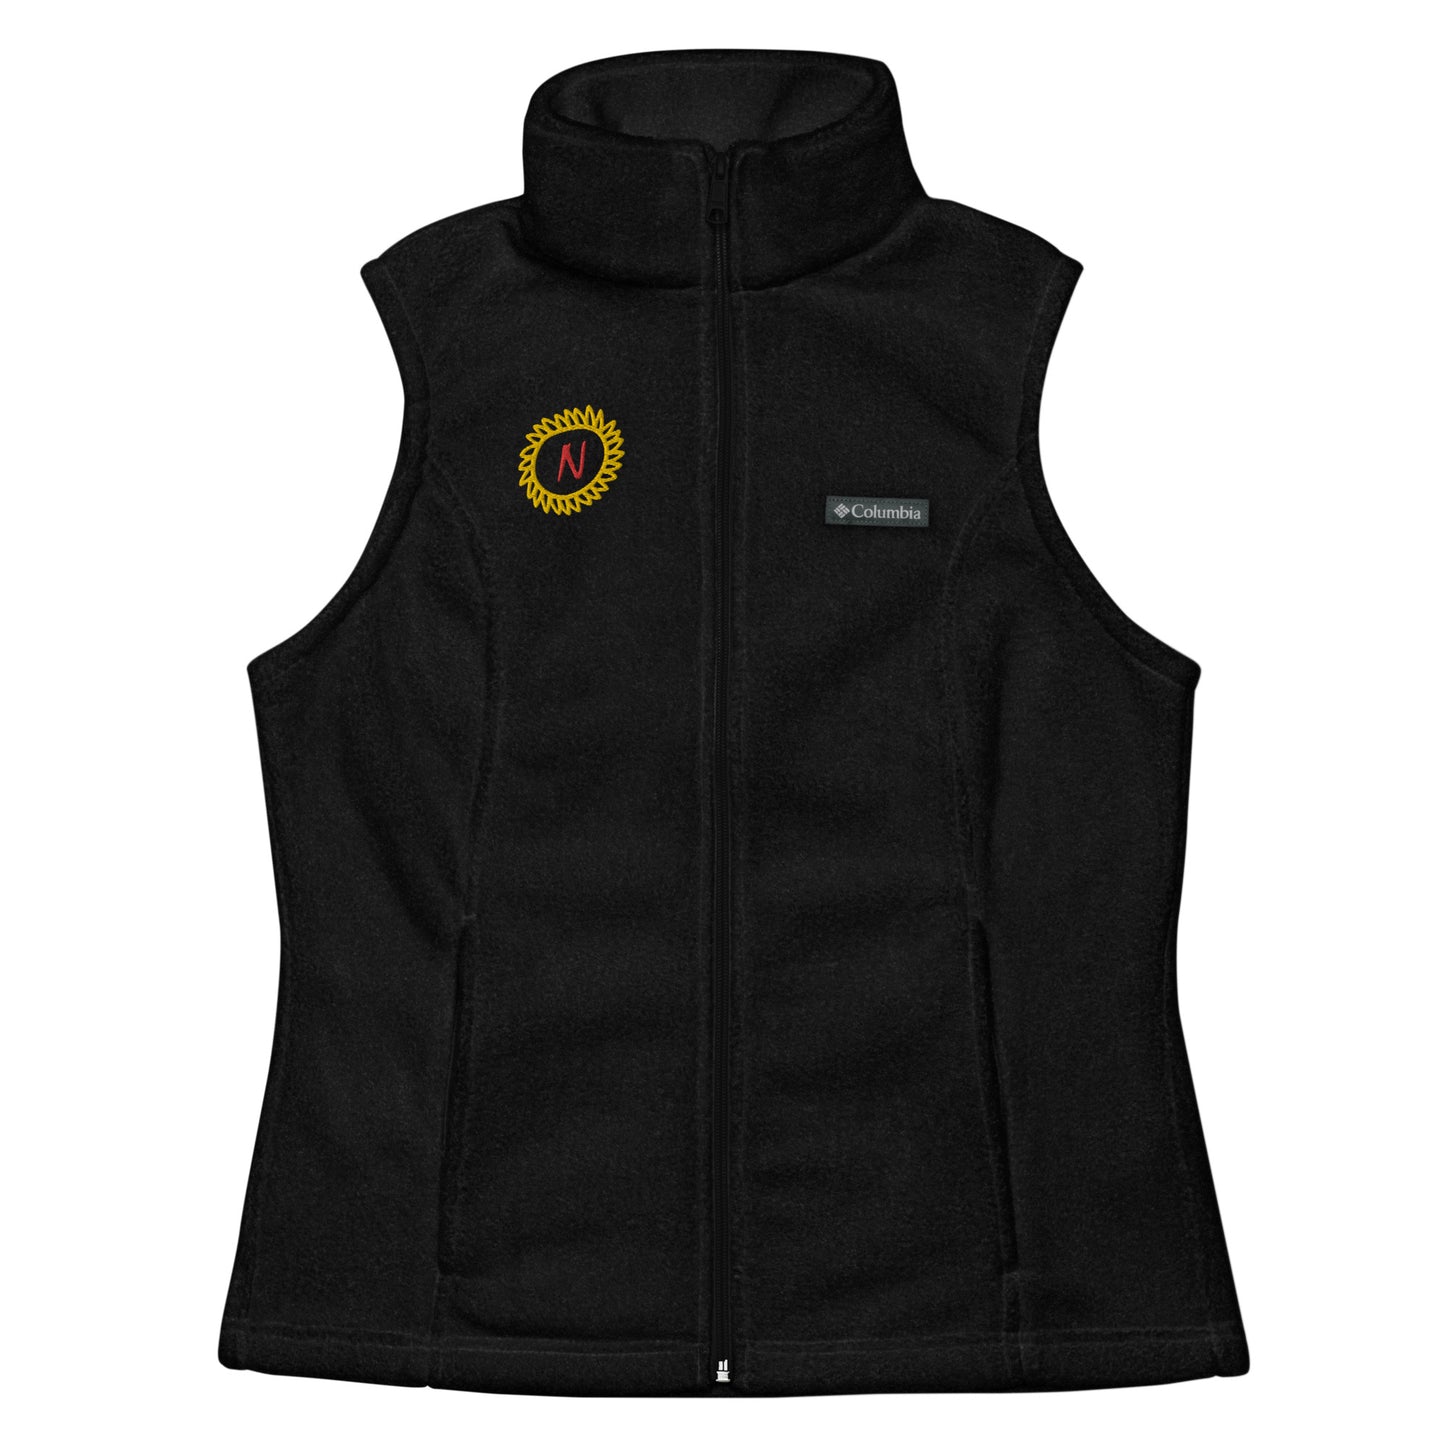 Women’s Columbia fleece vest, gold/red thread embroidery "N" in a circle